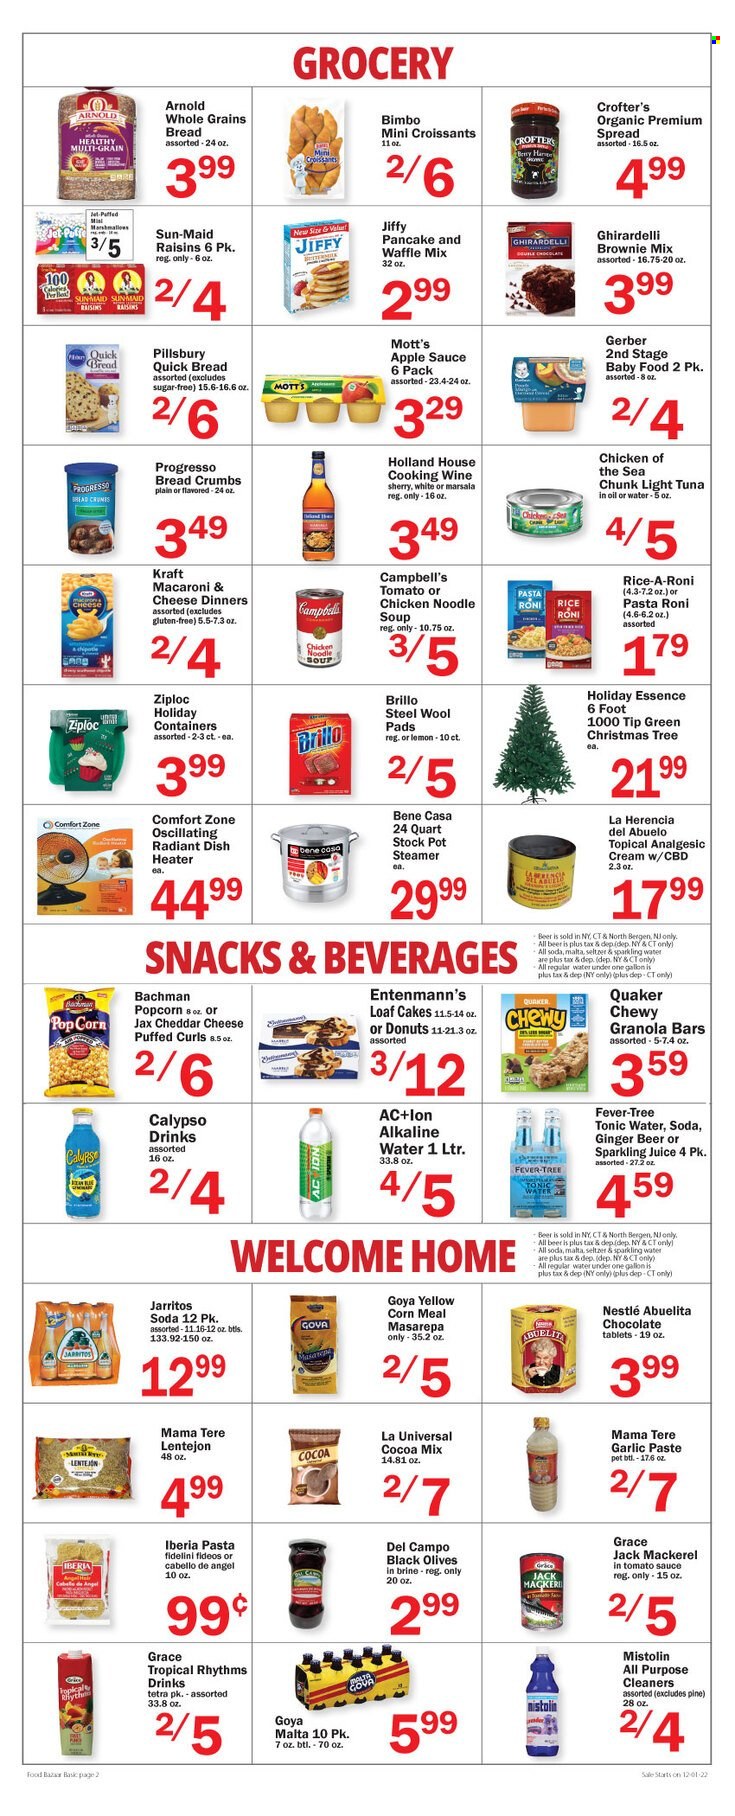 thumbnail - Food Bazaar Flyer - 12/01/2022 - 12/07/2022 - Sales products - cake, croissant, donut, Entenmann's, breadcrumbs, brownie mix, garlic, Mott's, mackerel, tuna, Campbell's, macaroni & cheese, soup, Pillsbury, noodles cup, Quaker, noodles, Progresso, Kraft®, marshmallows, Nestlé, chocolate, snack, Ghirardelli, Gerber, popcorn, cocoa, sugar, olives, light tuna, Chicken of the Sea, Goya, granola bar, rice, stockpot, garlic paste, apple sauce, raisins, dried fruit, juice, tonic, sparkling juice, seltzer water, soda, sparkling water, alkaline water, cooking wine, Marsala, sherry, beer, ginger beer. Page 2.